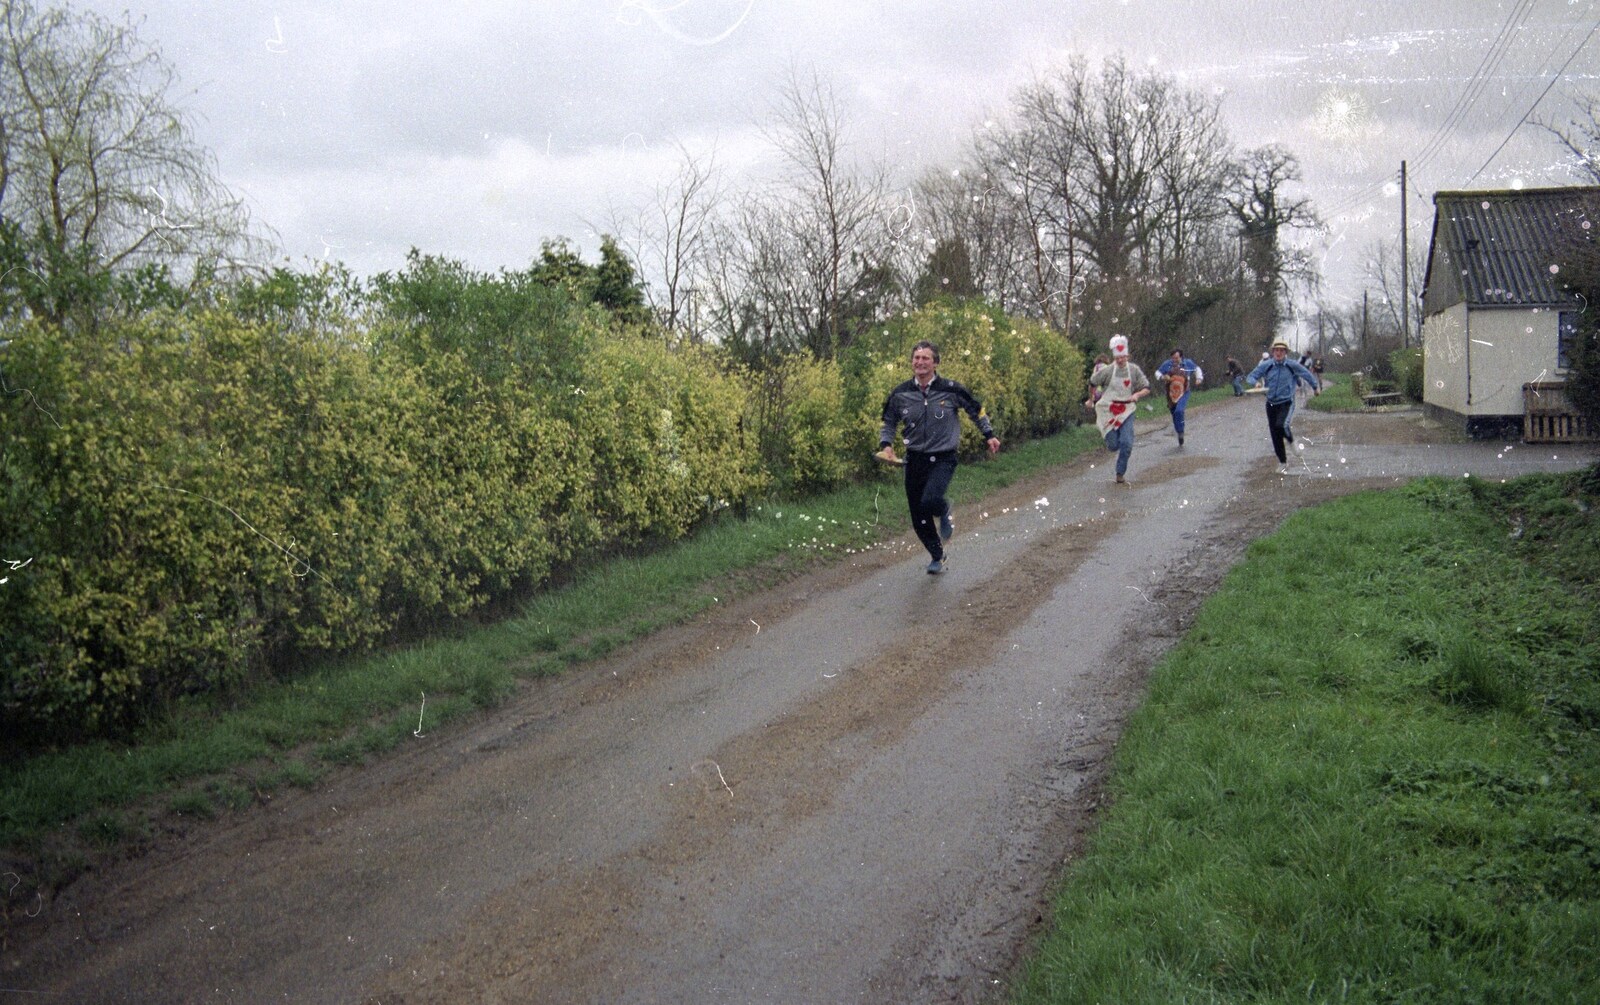 Geoff leads the men's race from Pancake Day in Starston, Norfolk - 27th February 1990